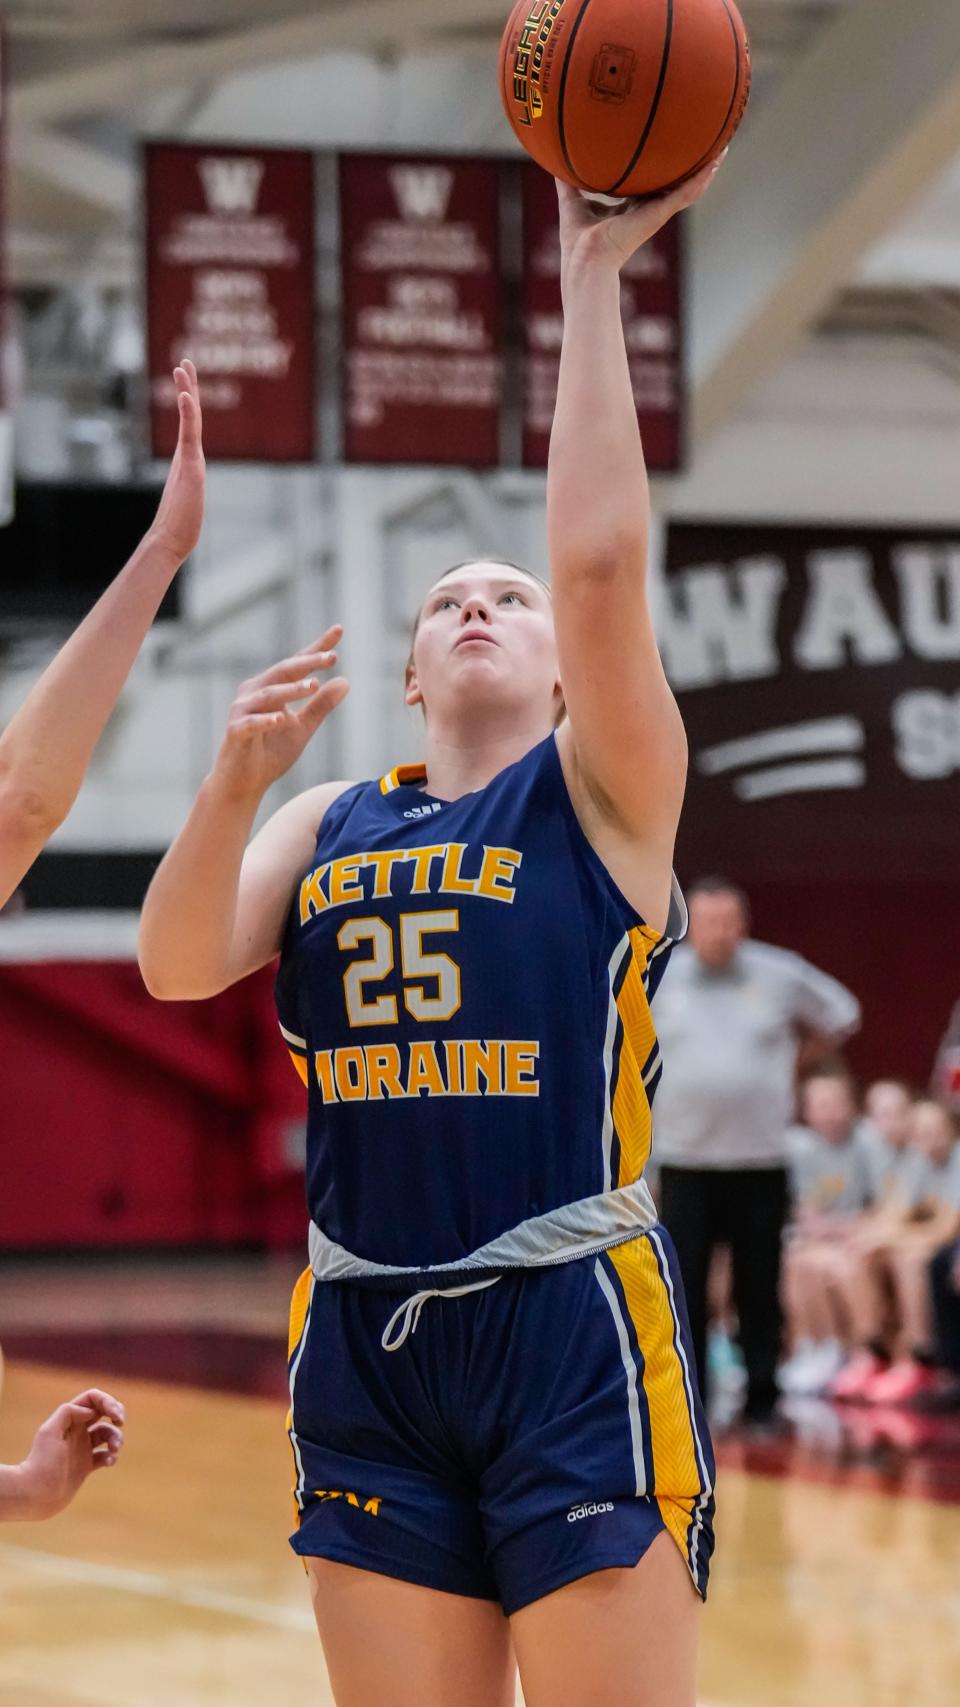 Kettle Moraine's Grace Grocholski is a unanimous all-state first-team selection. She helped Kettle Moraine win its second consecutive Division 1 state basketball championship. Grocholski is a University of Minnesota commit.